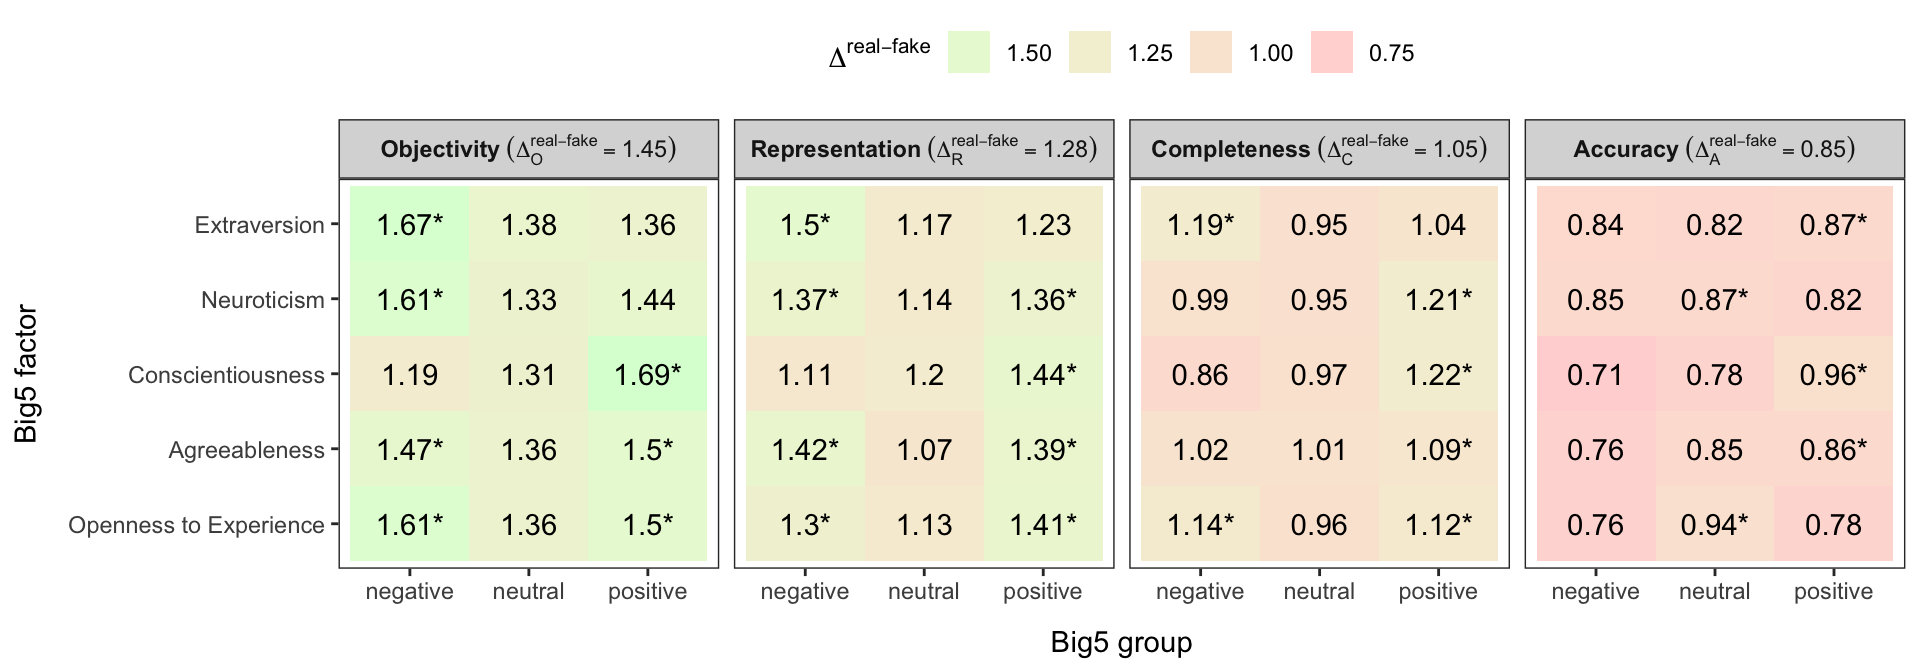 Influence of the Big Five personality factors on the identification of fake and real statement types